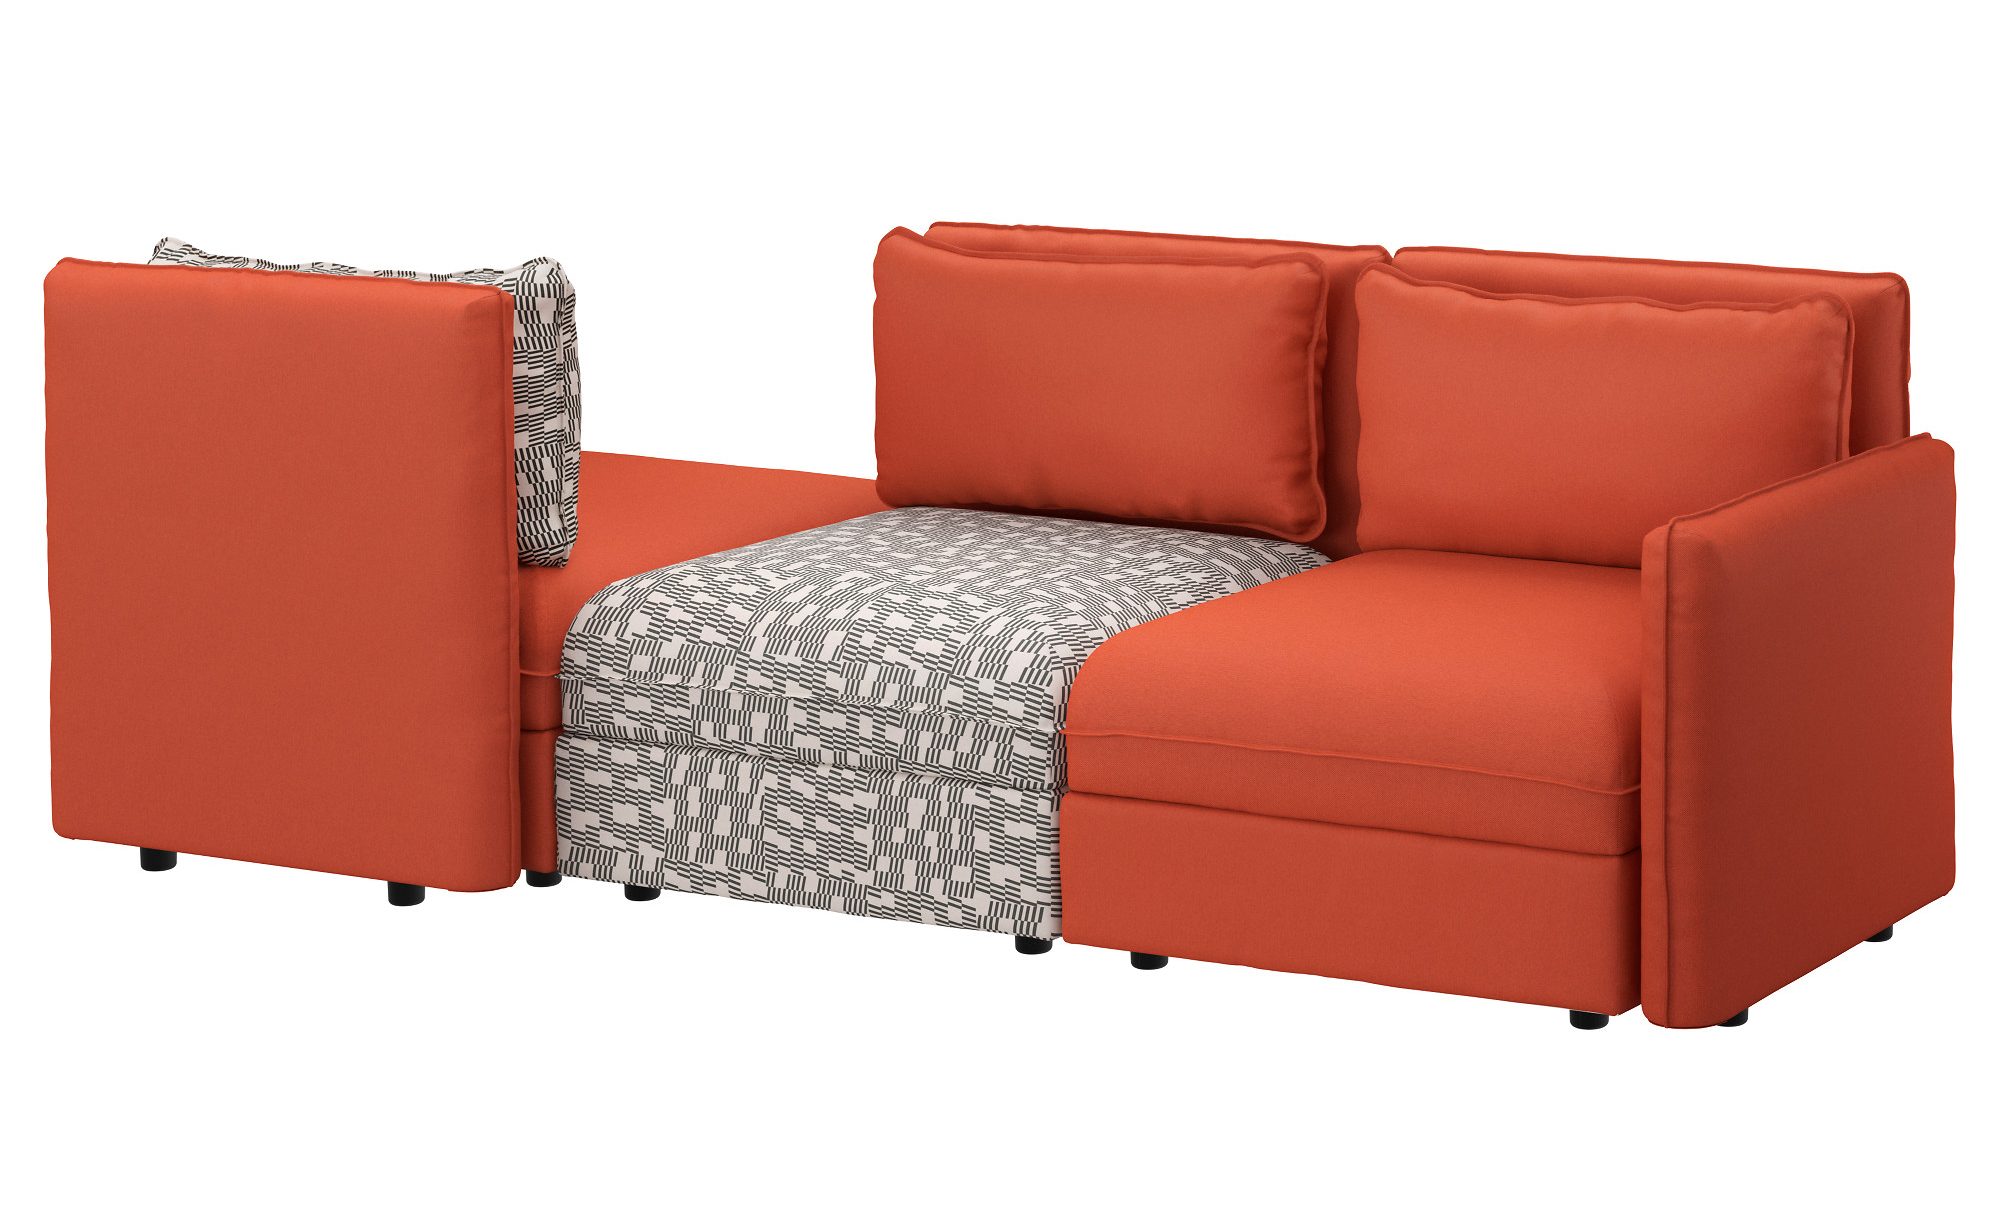 blomst Gum Overskyet IKEA Vallentuna sofa review: Something fishy this way comes | Comfort Works  Blog & Sofa Resources